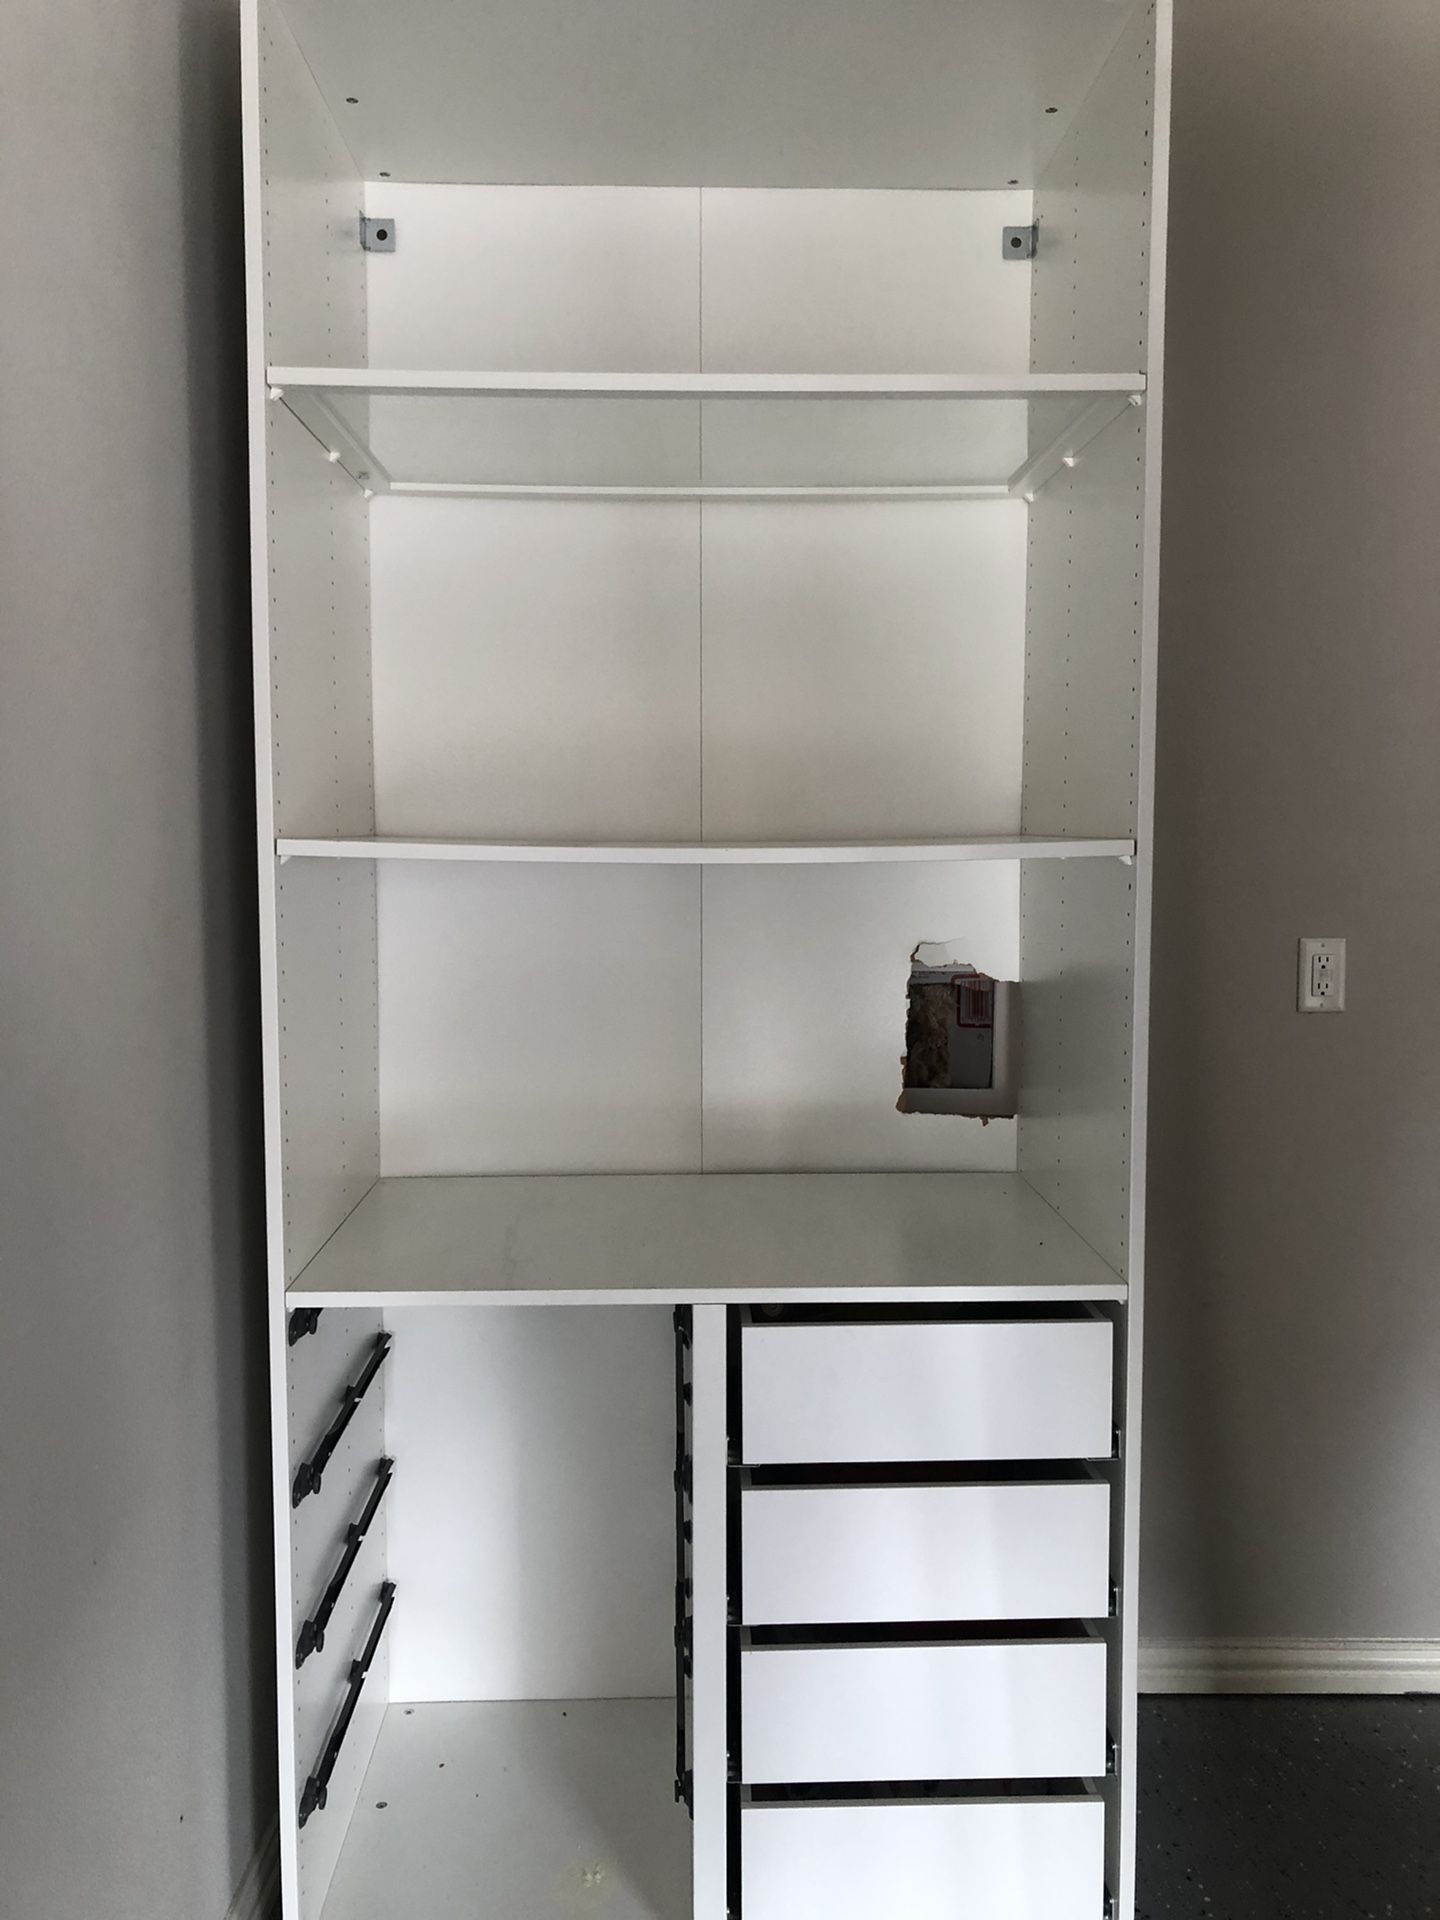 IKEA PAX system. Two closets WITH drawers, wire drawers, and all rods and shelves